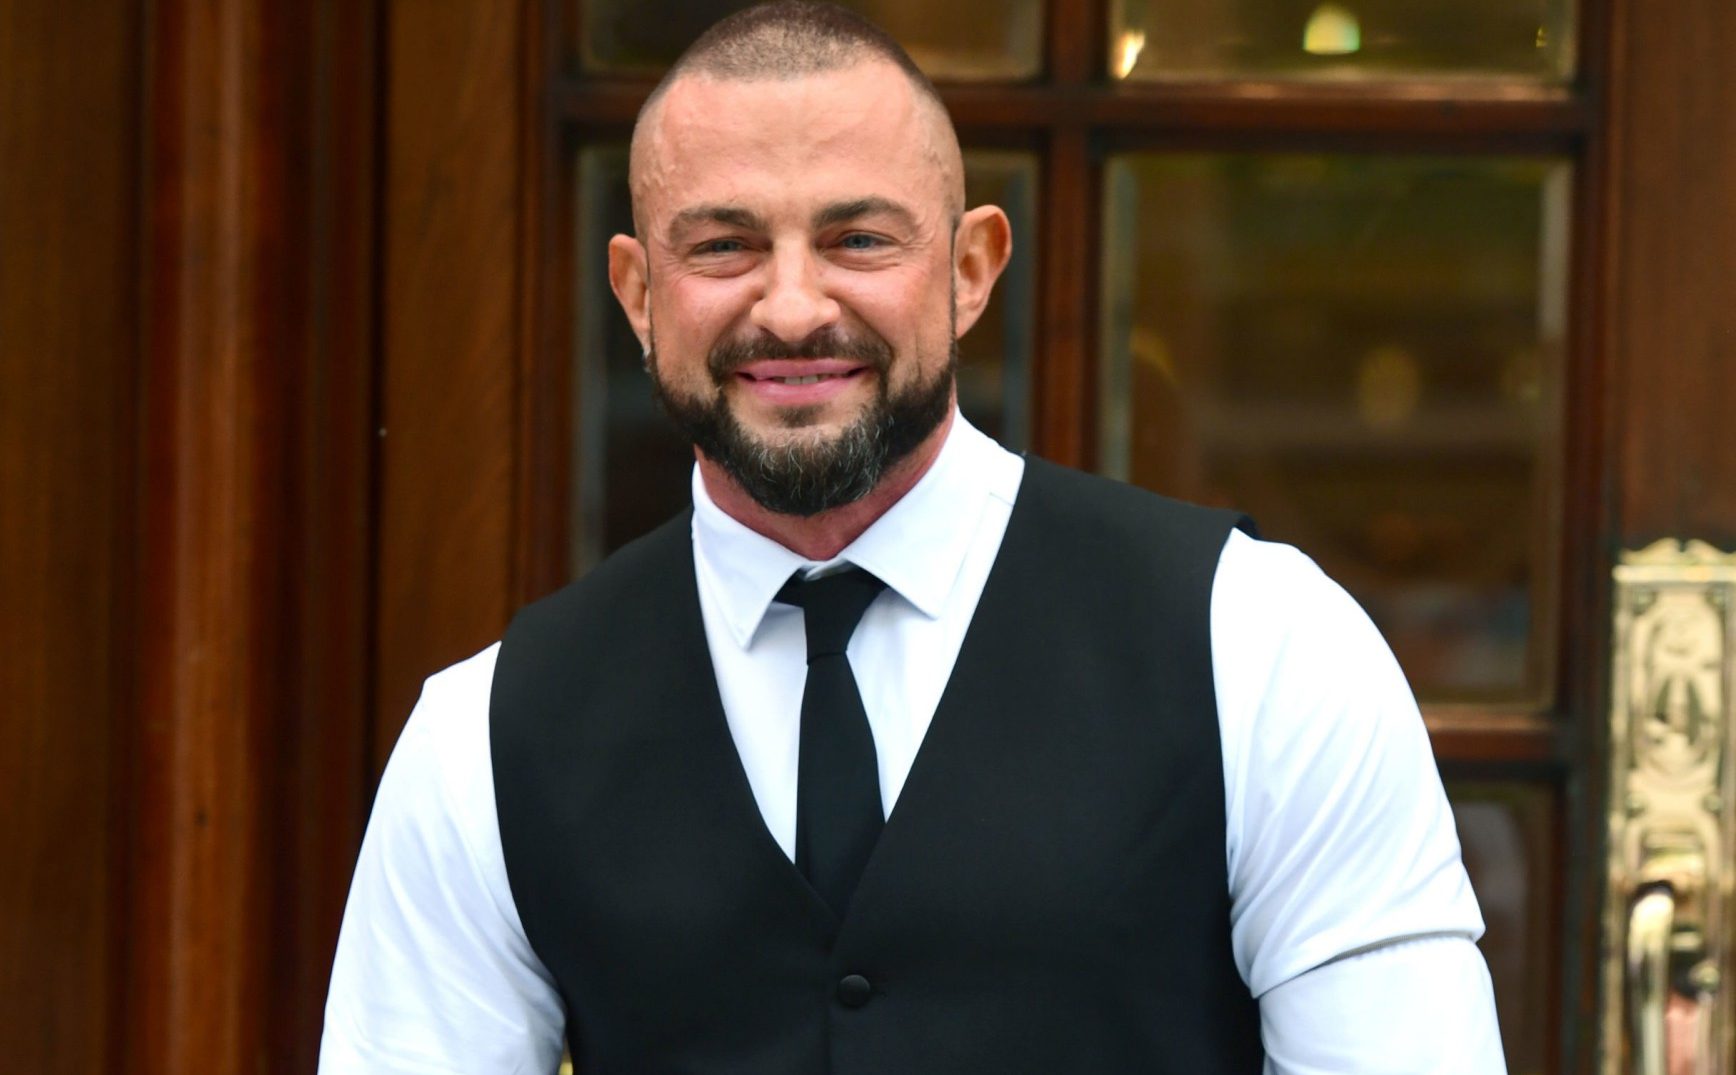 strictly come dancing star robin windsor ‘spoke publicly about suicide before his death’